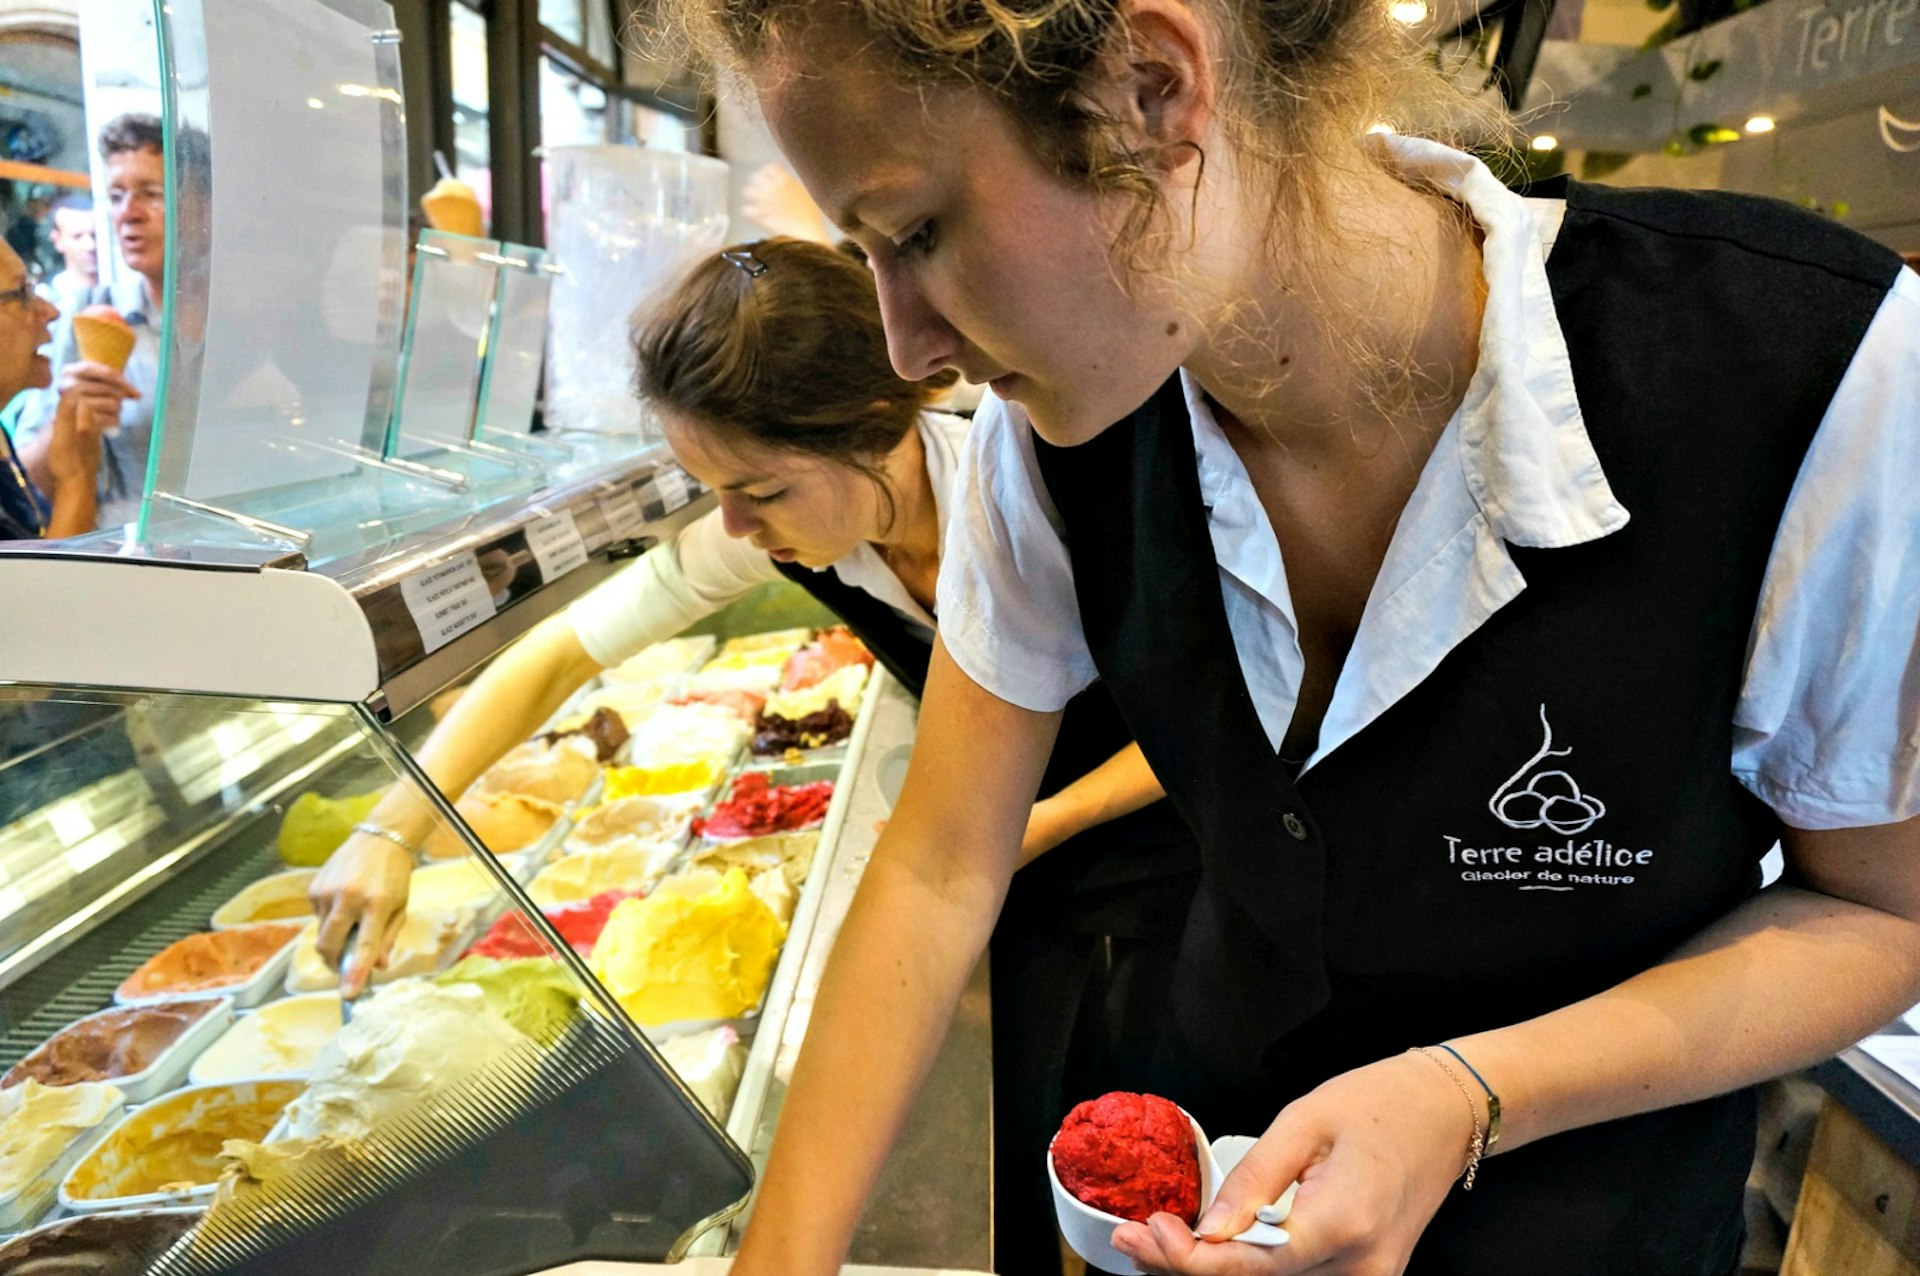 Assistants serving up scoops at Terre Adélice. Image © Monica Suma / Lonely Planet